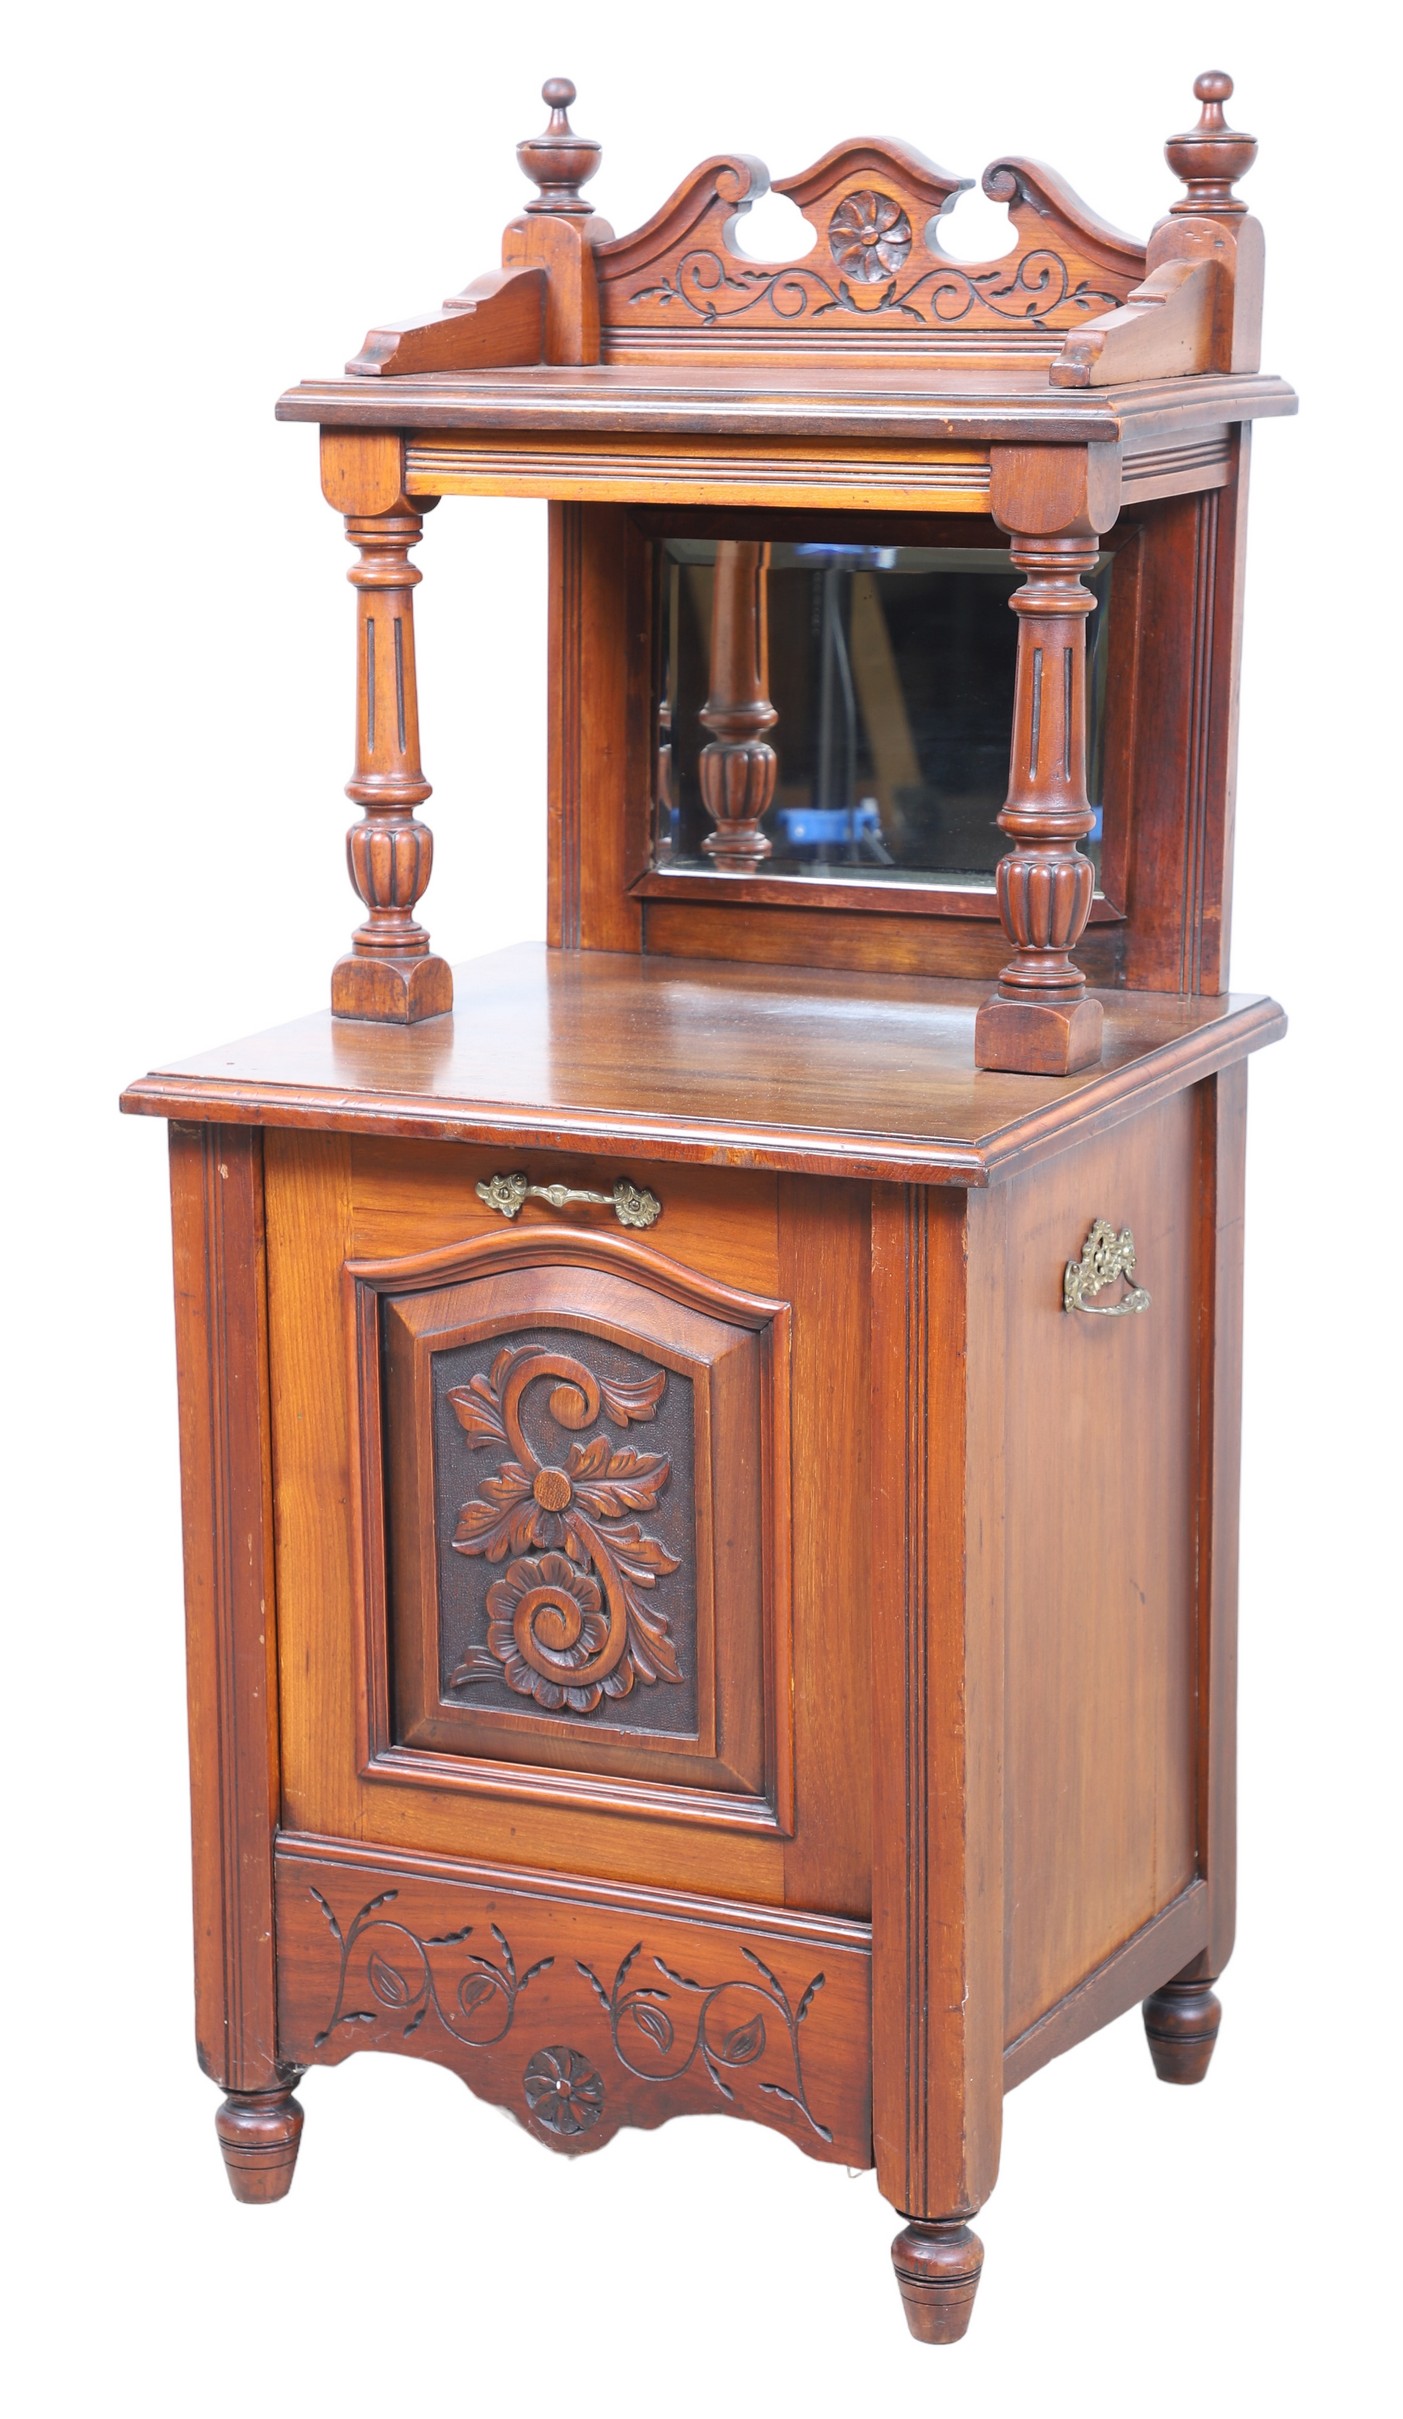 Mahogany carved cabinet, top with carved